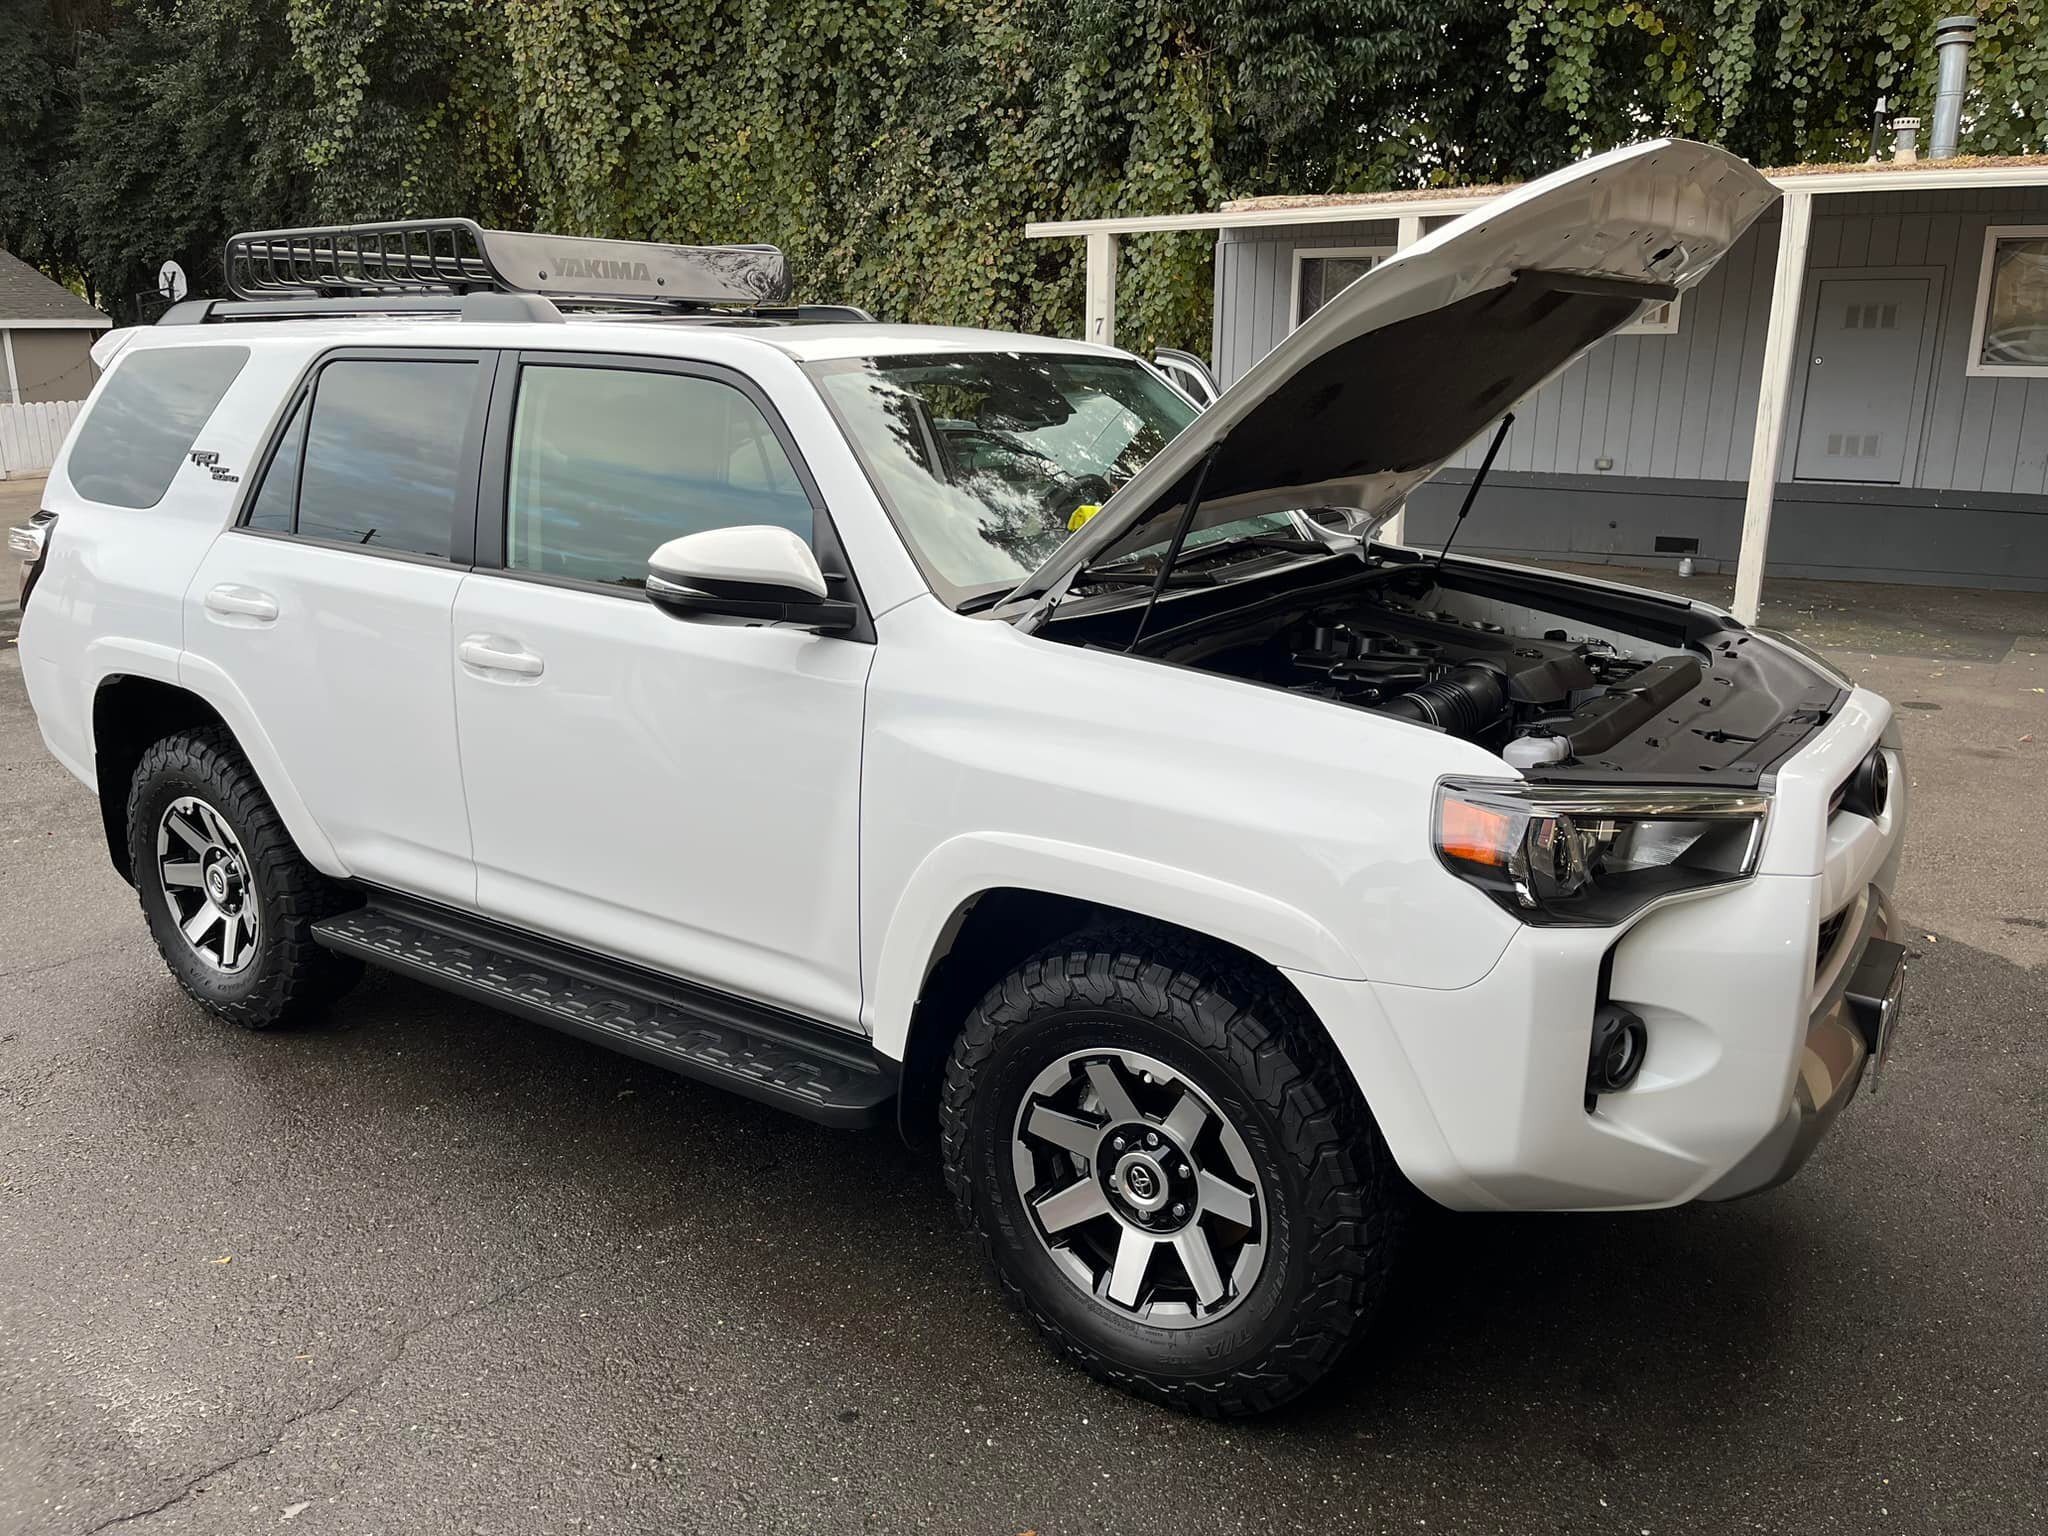 Shout out to my crew for a fantastic job on this 4 Runner!
#detailersofinstagram #detailersoffacebook #mobiledetailing